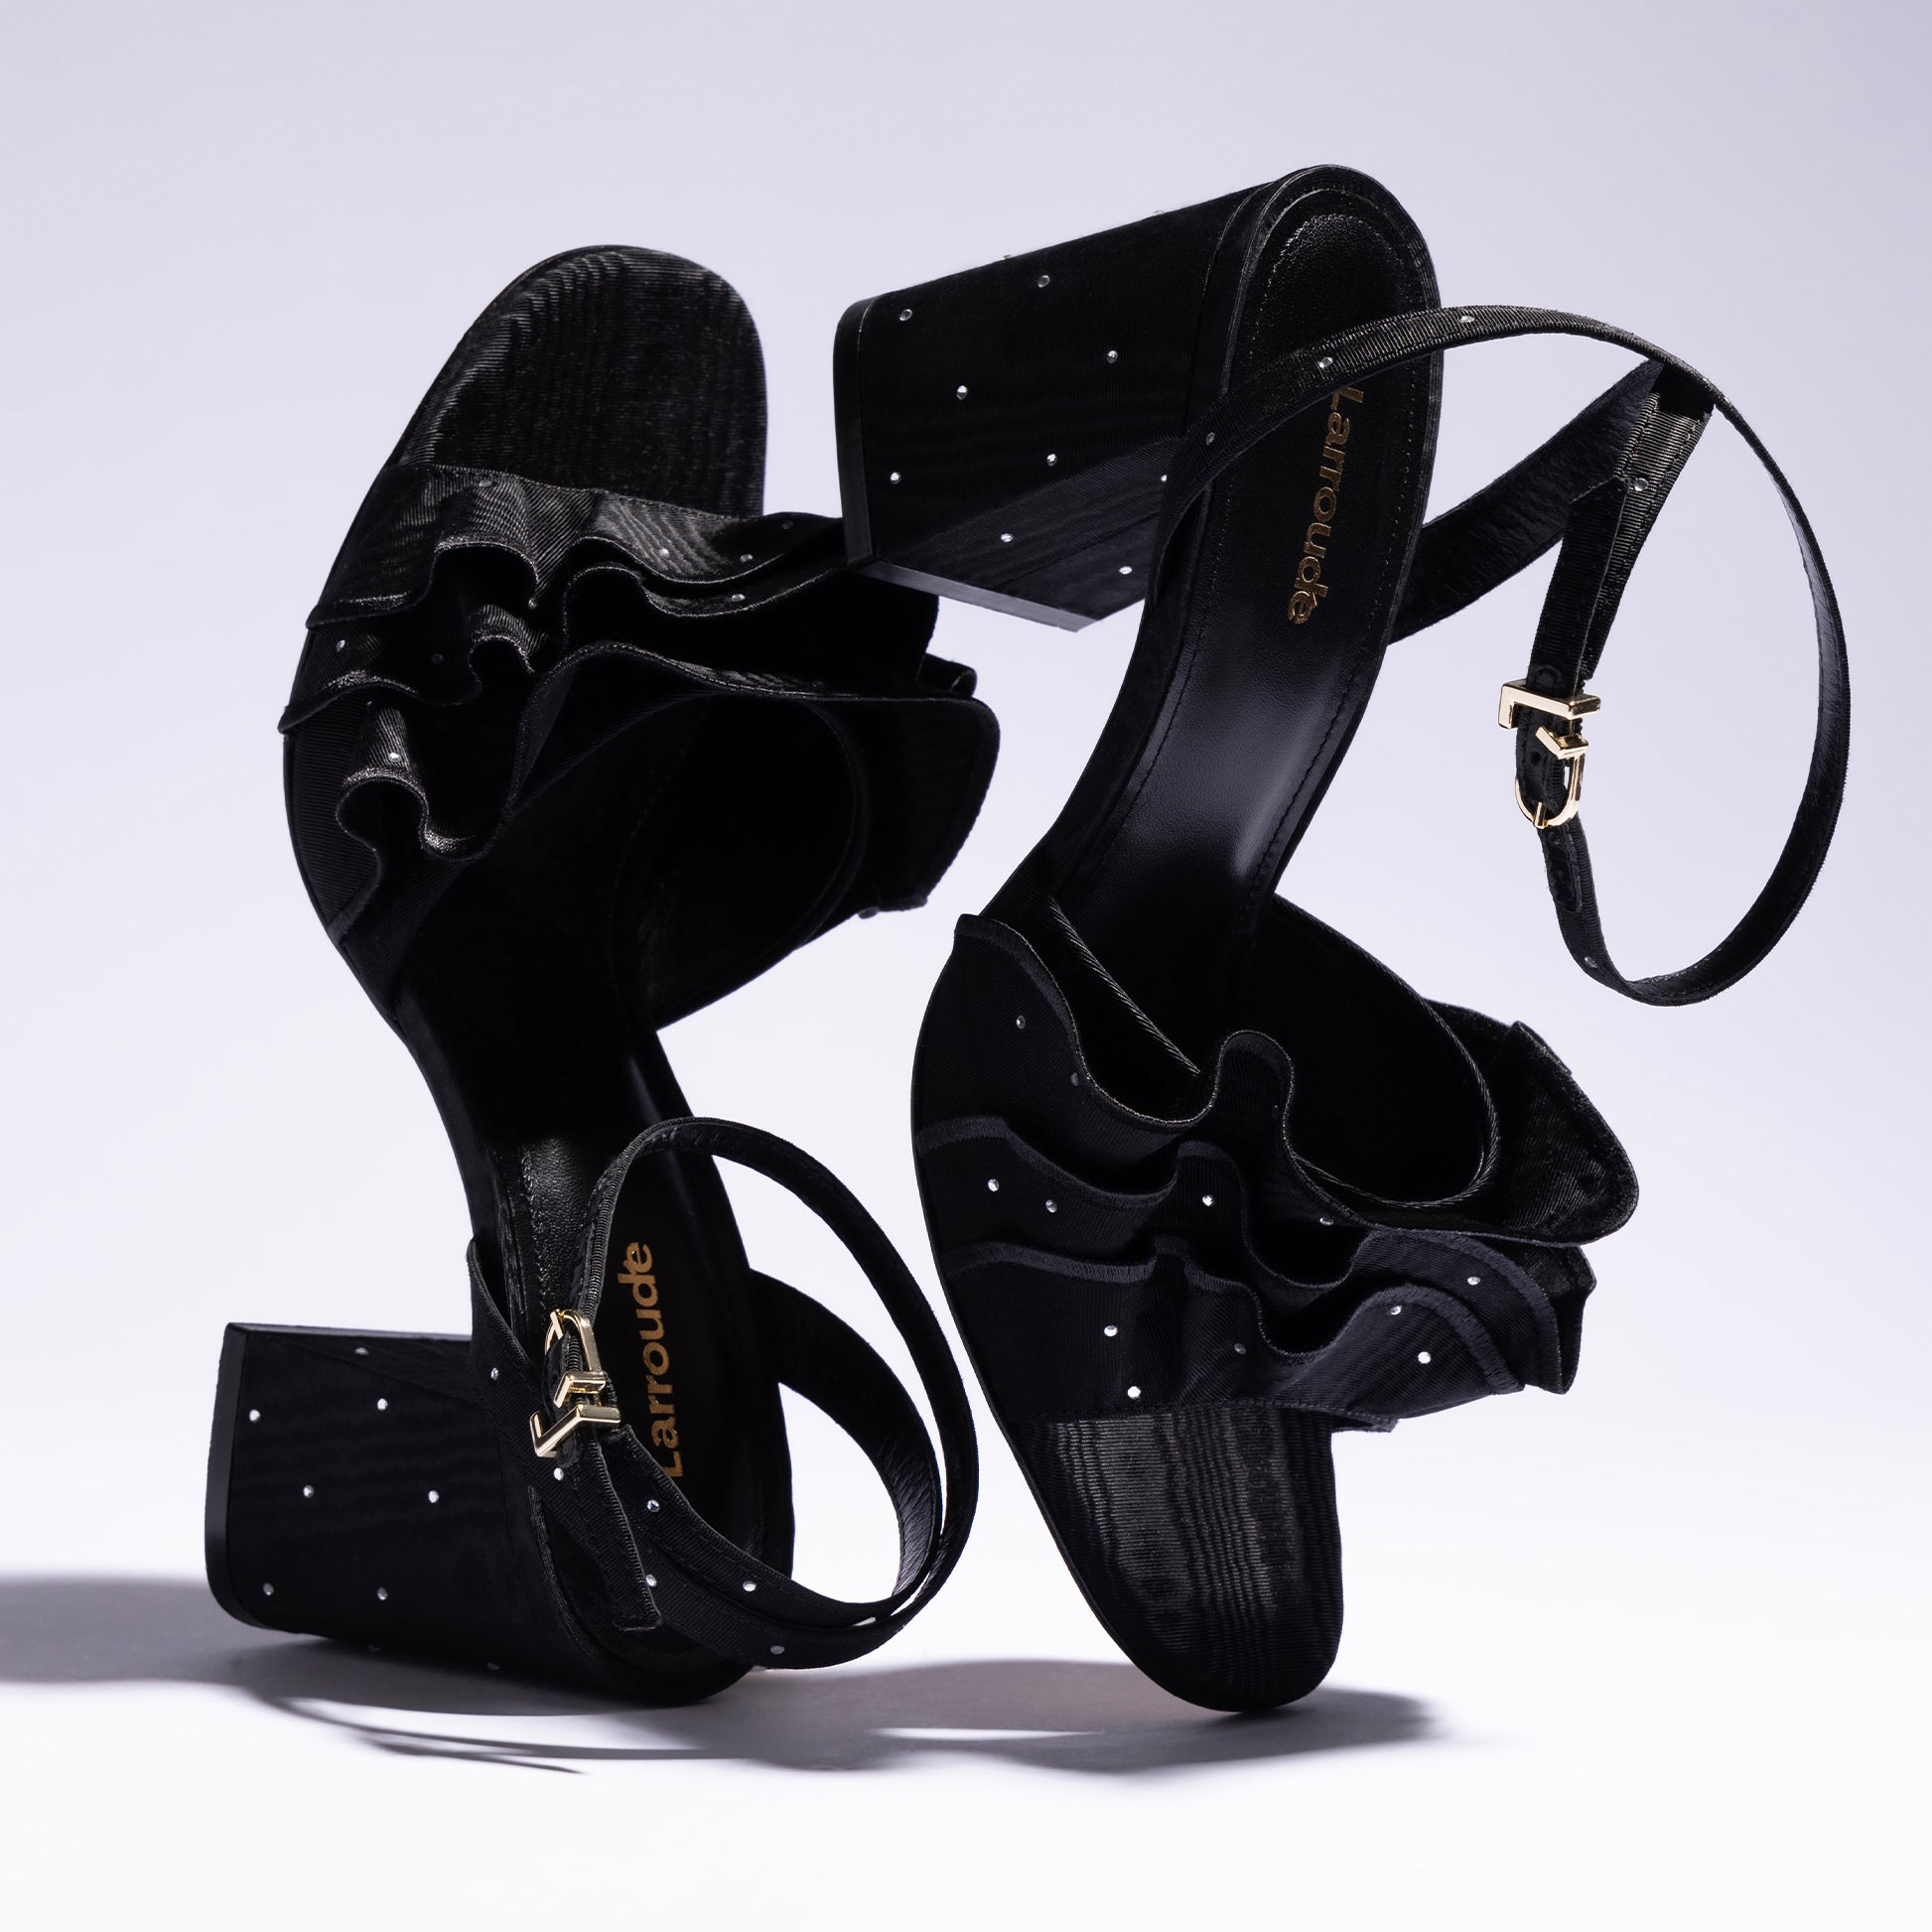 Selena Ruffle Sandal In Black Fabric and Crystals